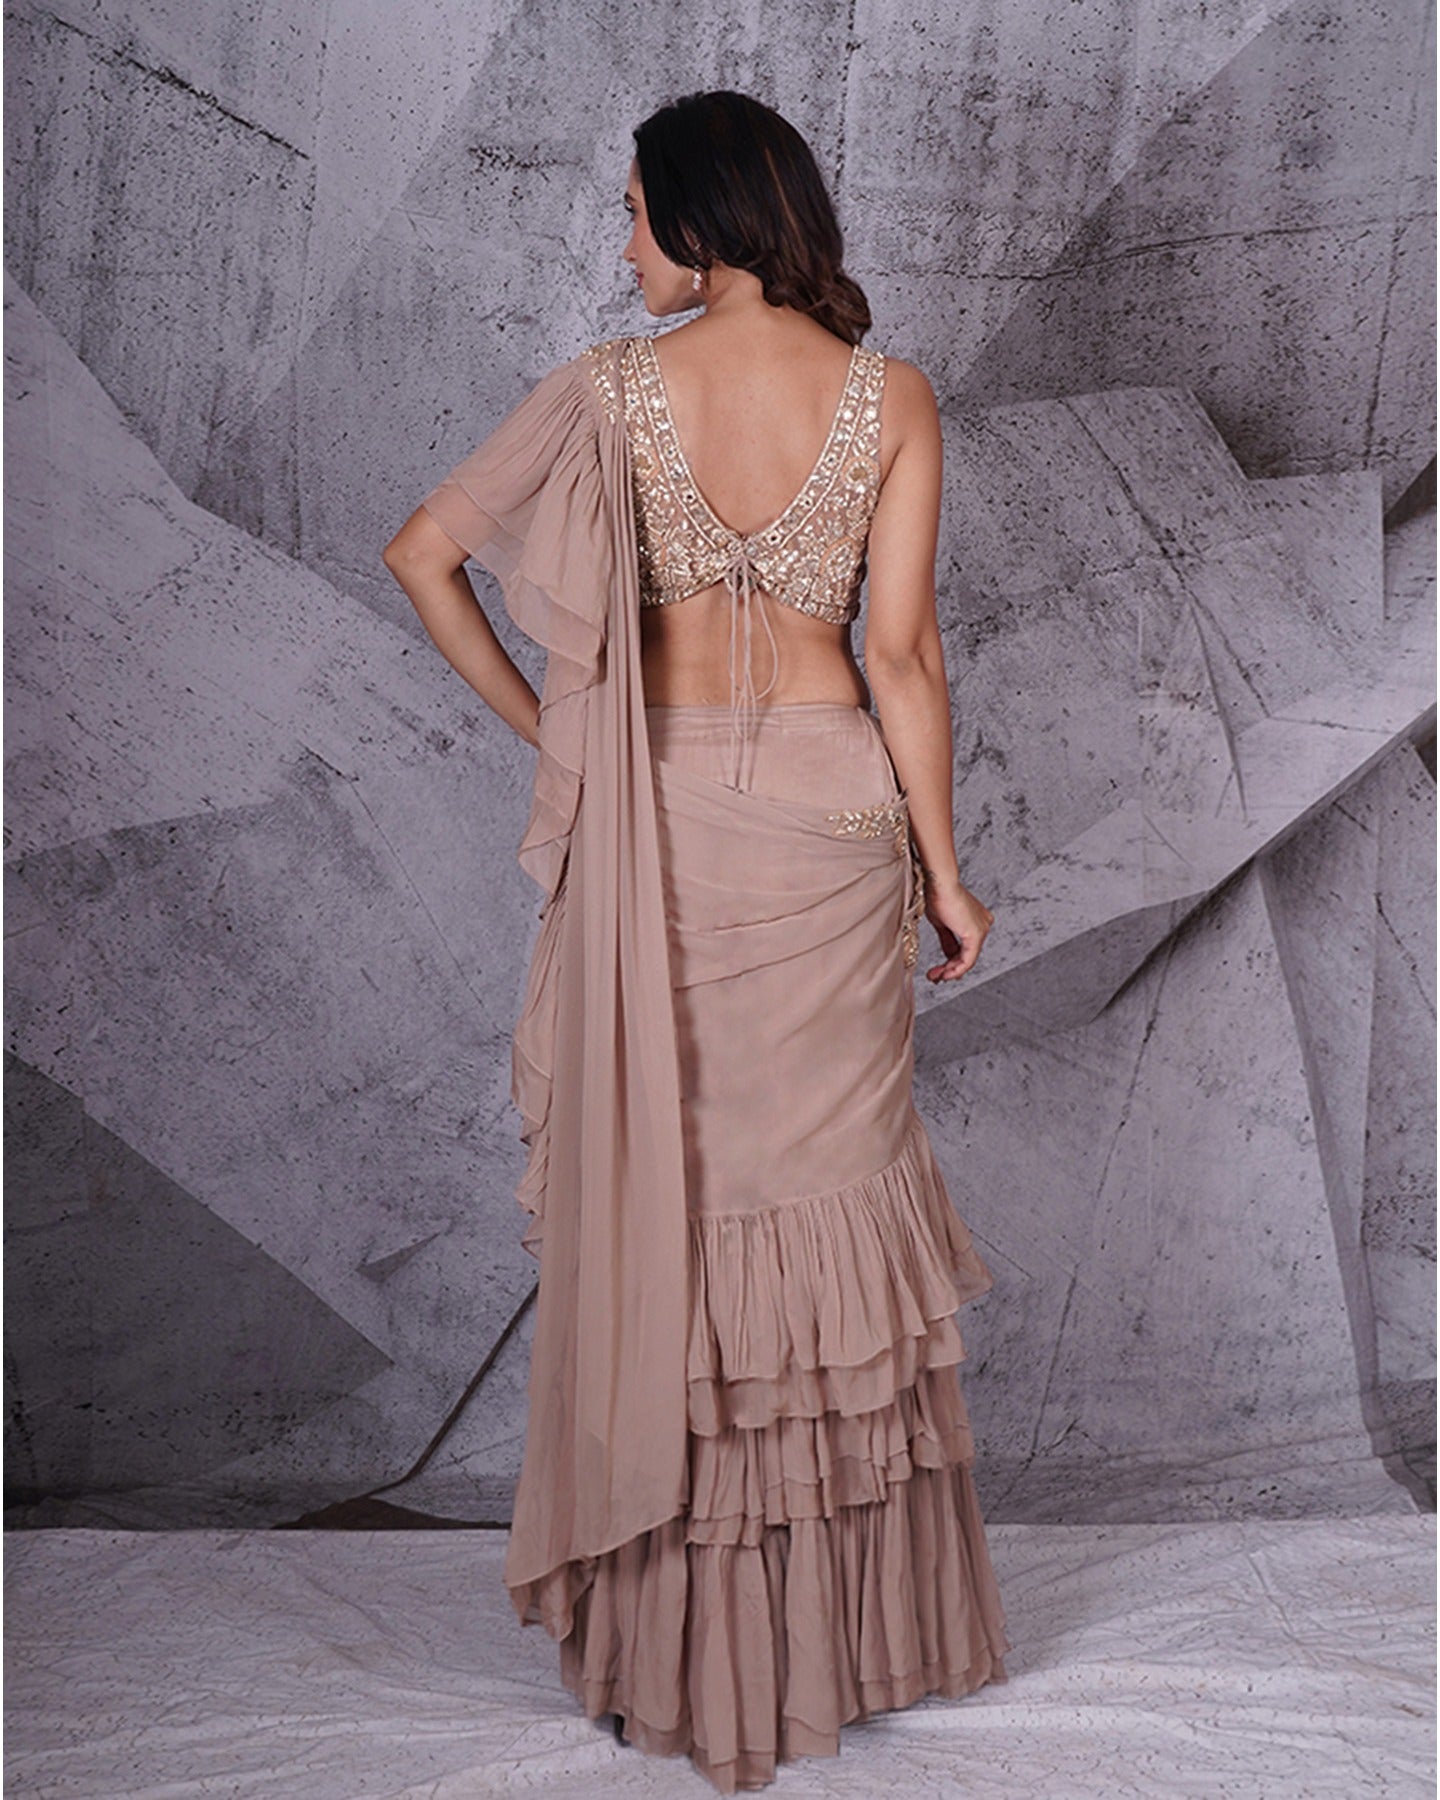 Draped in the subtle elegance of beige, this saree weaves a tale of timeless grace. A canvas of sophistication that speaks volumes in every fold.